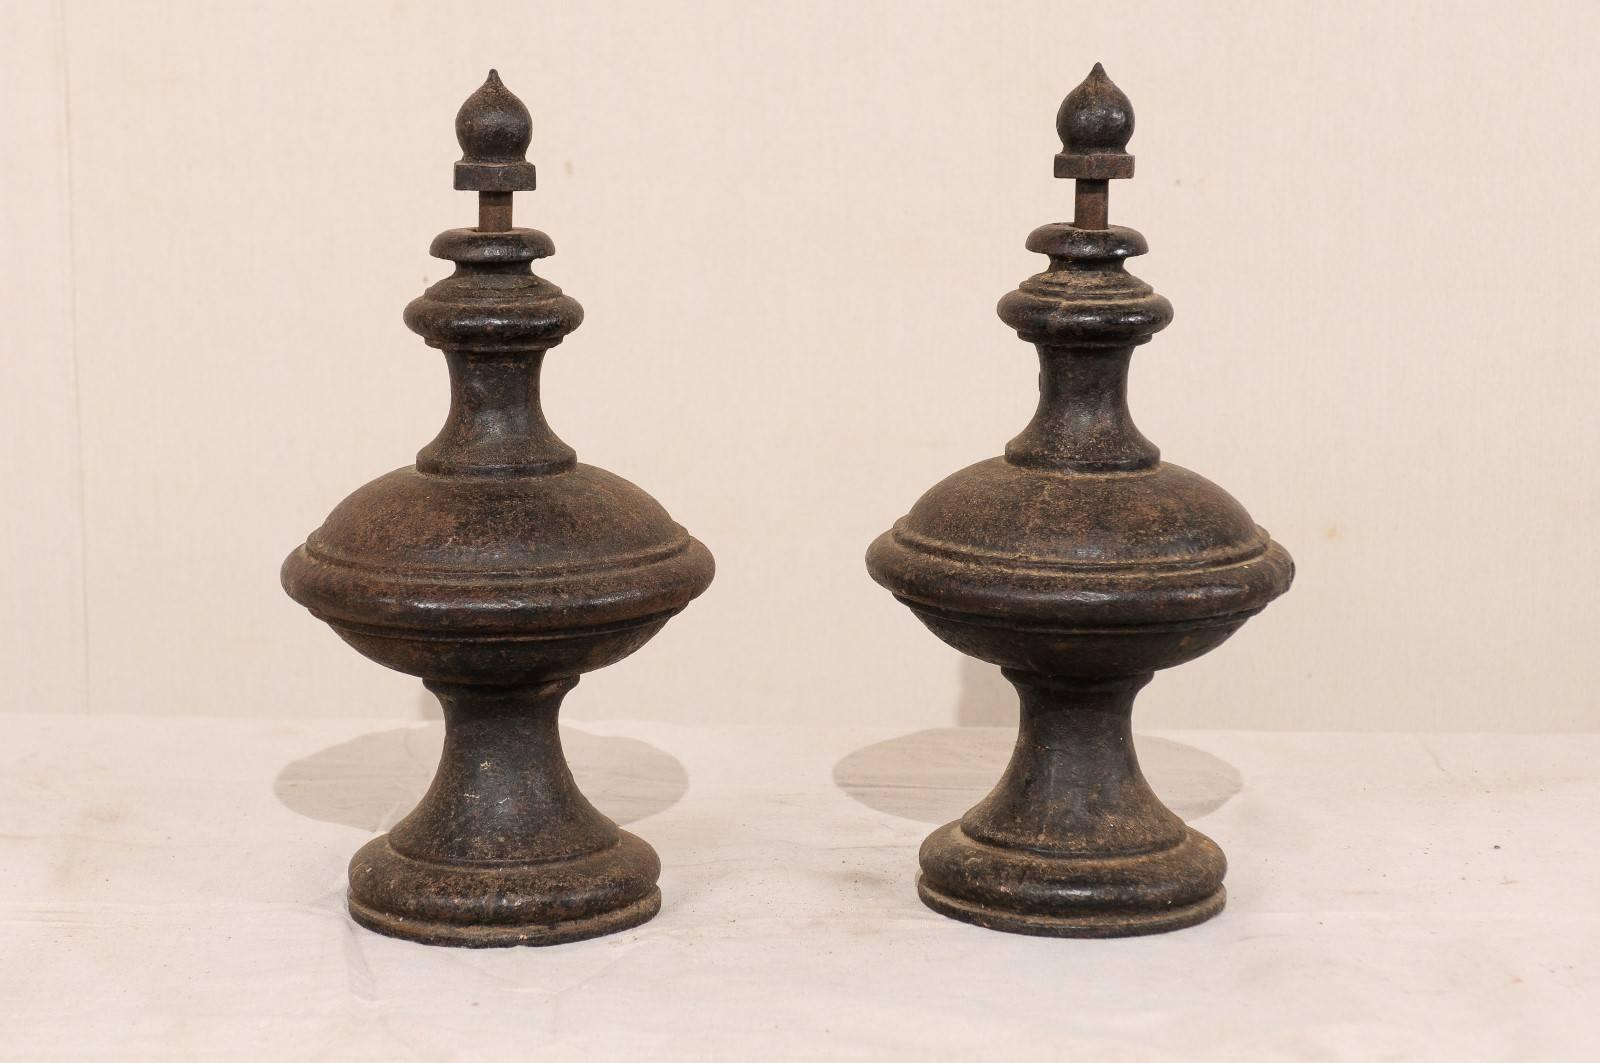 A pair of European cast iron finials from the 19th century. This pair of antique European finials are unique in form, have nicely shaped bodies, and great aged patina over dark cast iron. This pair of finials are functional as the balled tops lift